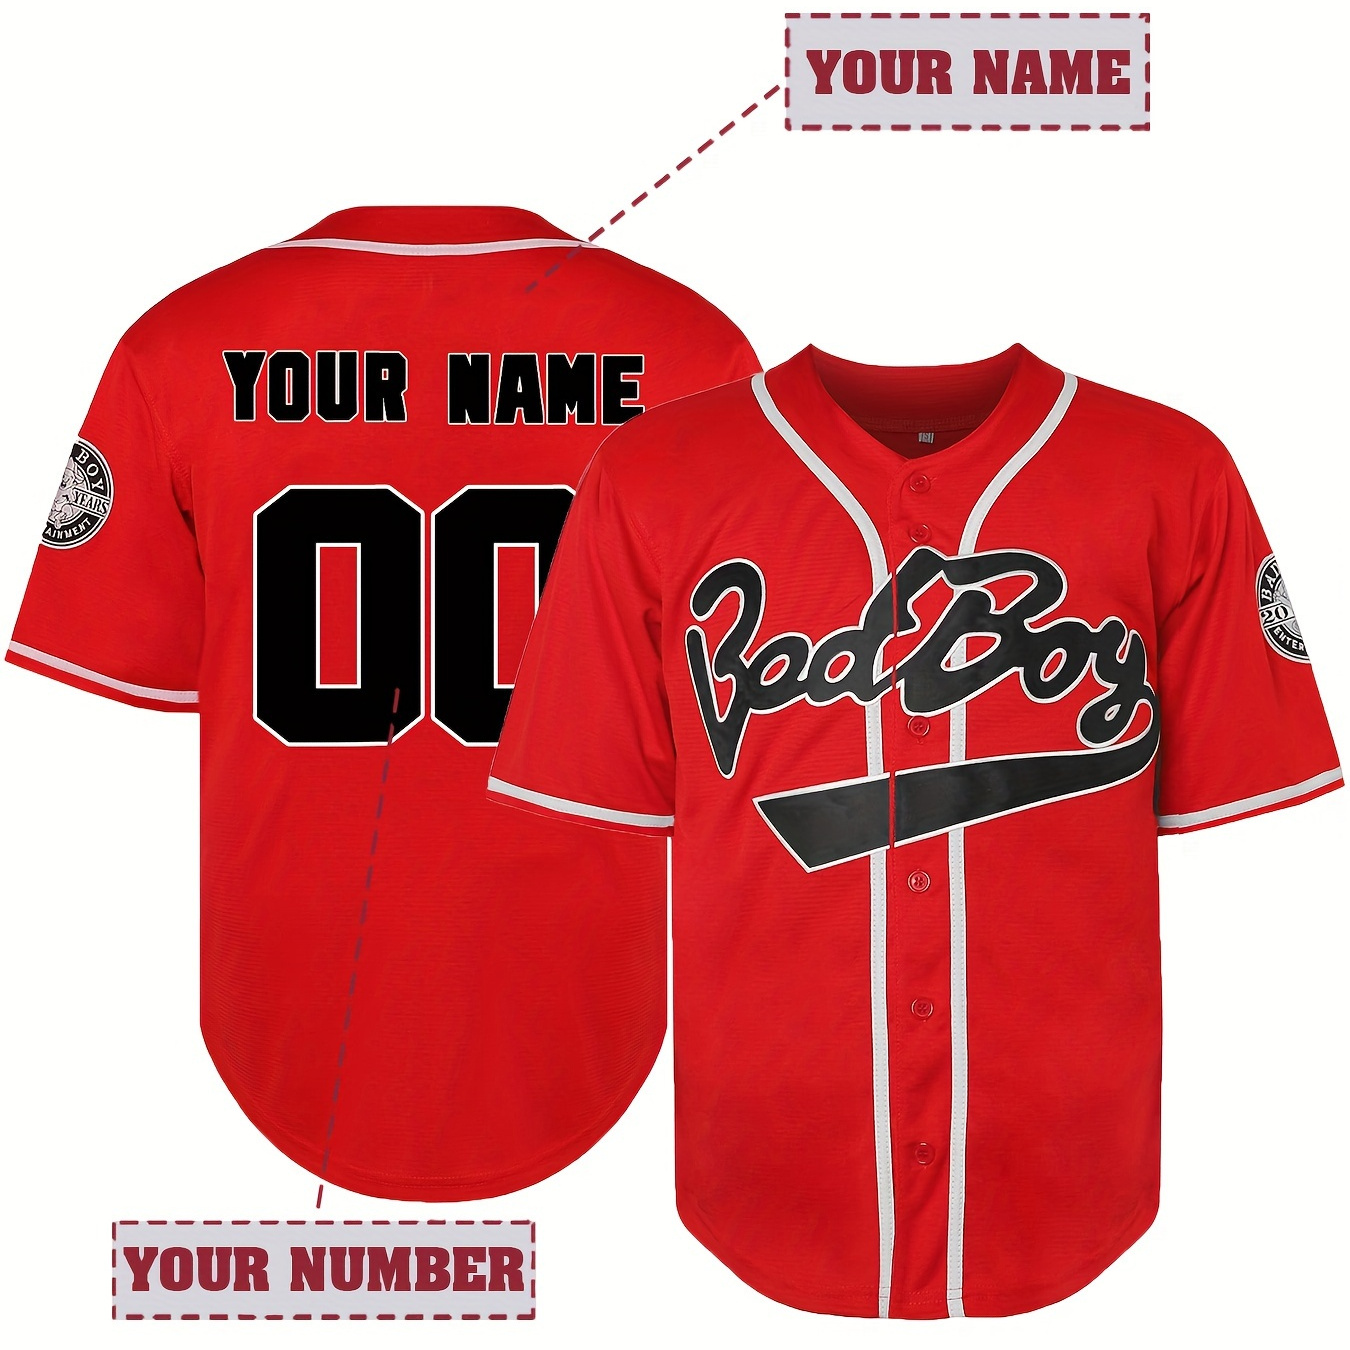 

Customized Name And Number Design, Men's Bad Boy Embroidery Design Short Sleeve Loose Breathable V-neck Baseball Jersey, Sports Shirt For Team Training